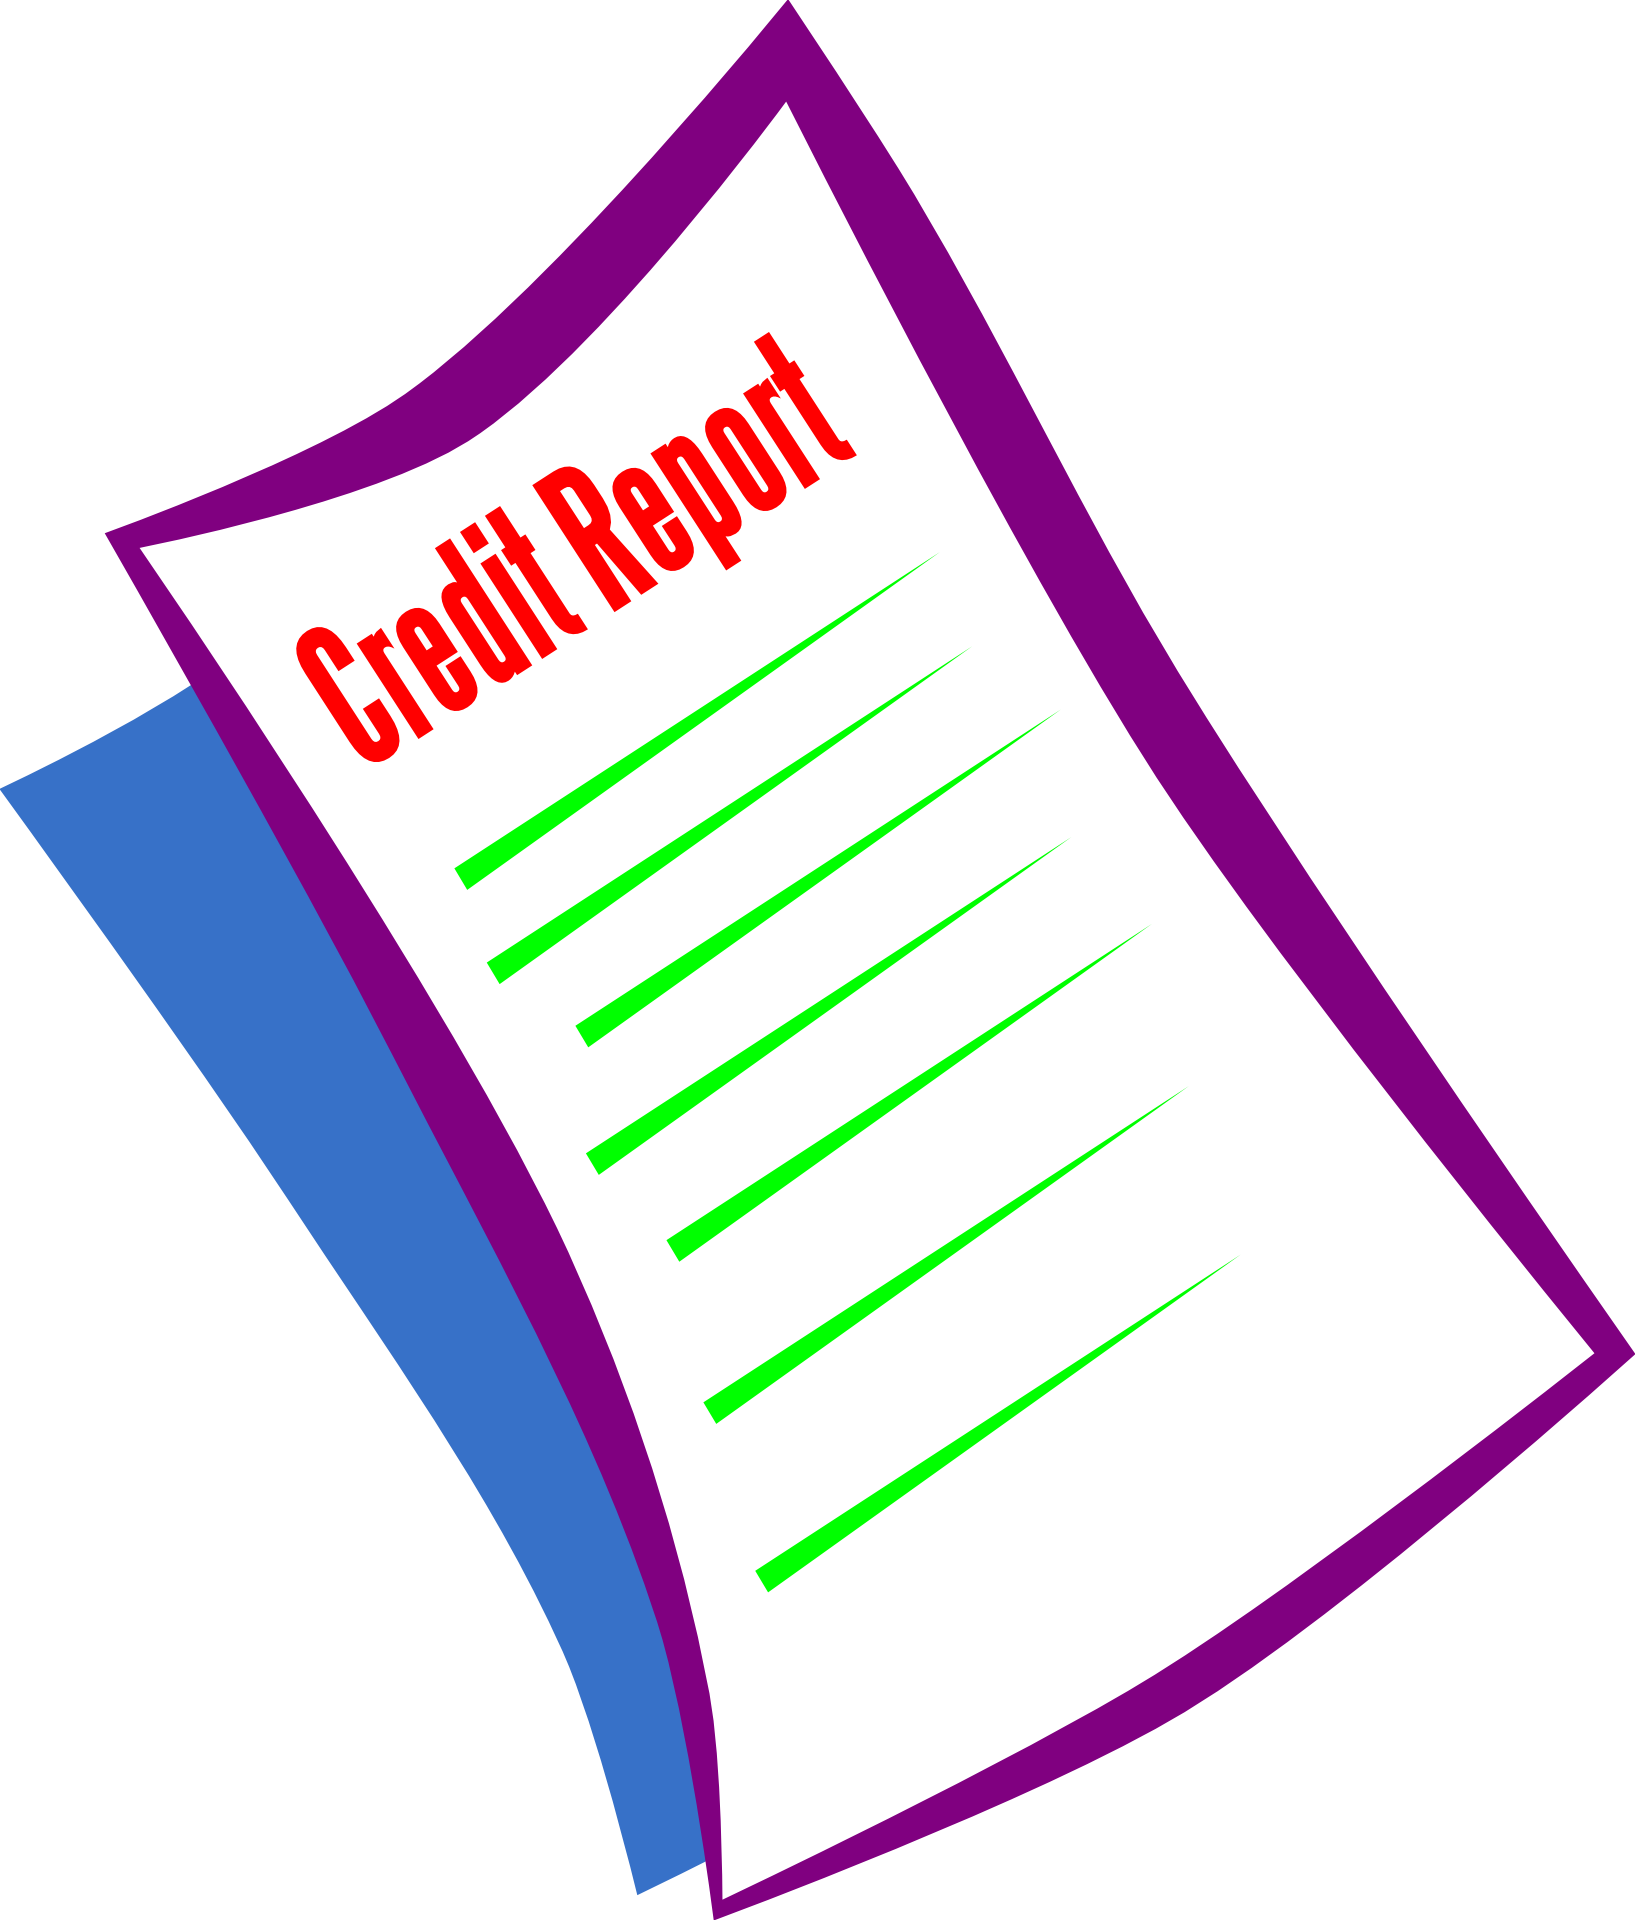 How to Improve your Credit Score